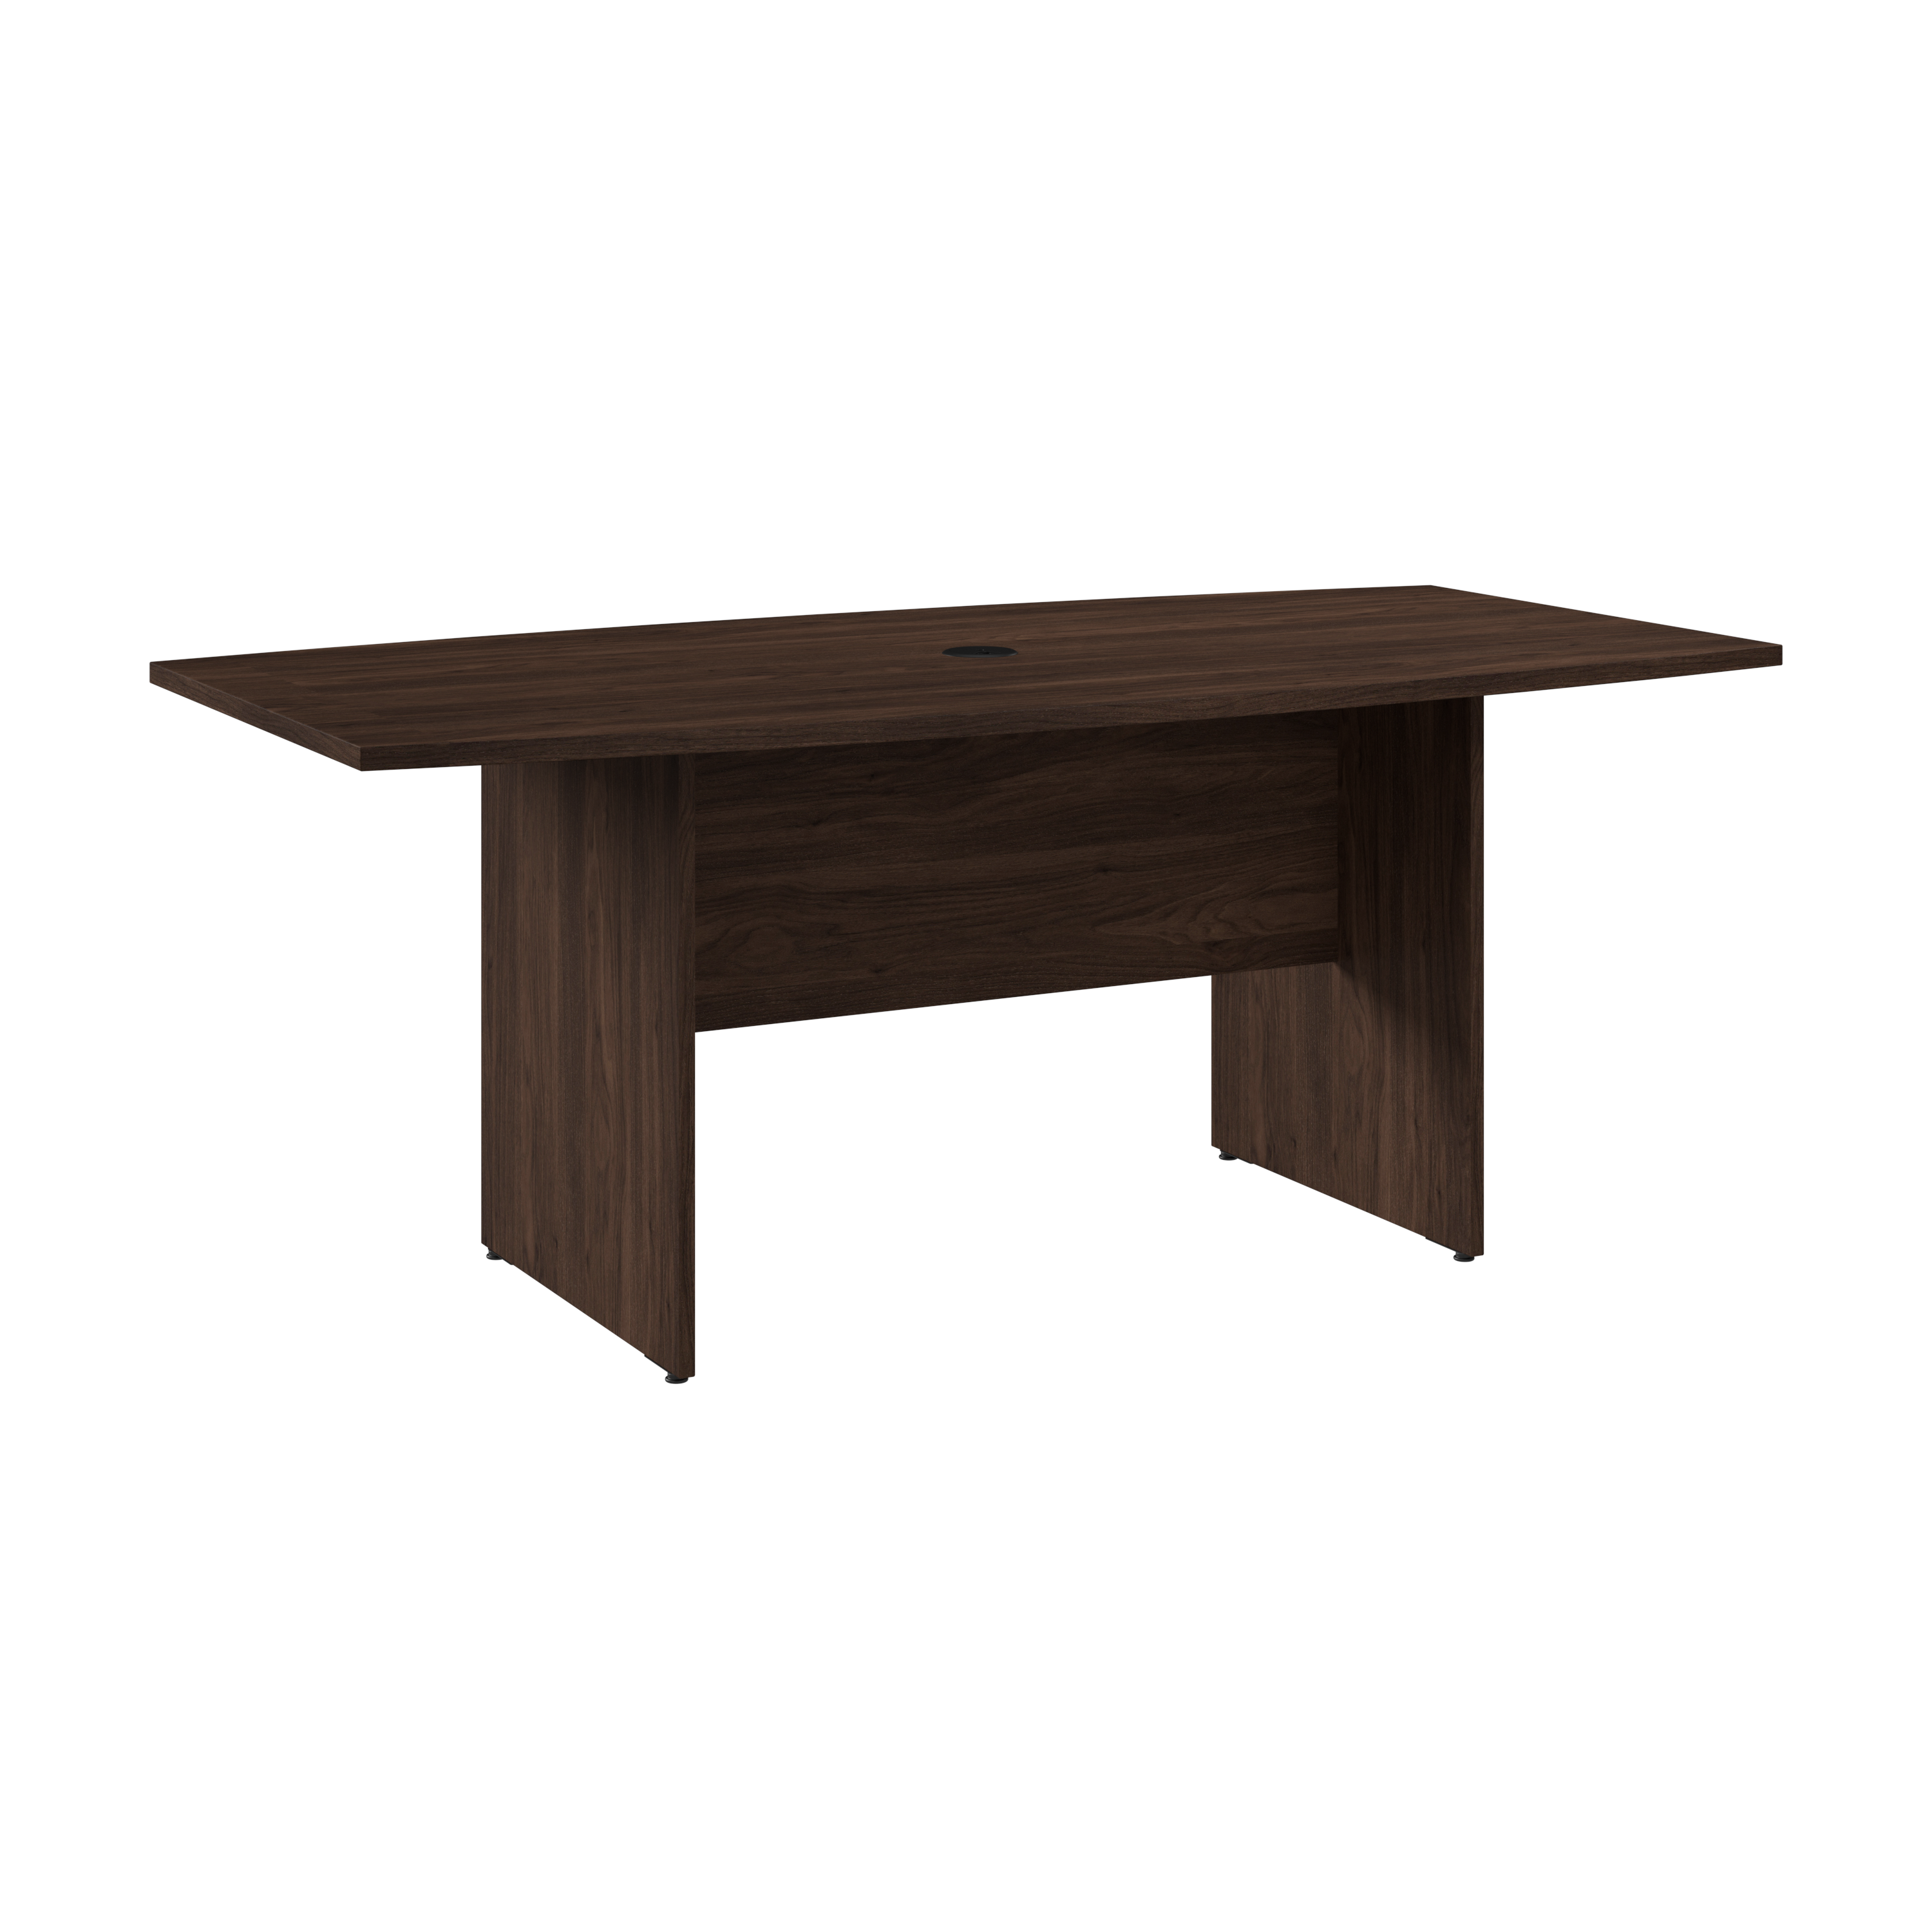 Shop Bush Business Furniture 72W x 36D Boat Shaped Conference Table with Wood Base 02 99TB7236BW #color_black walnut